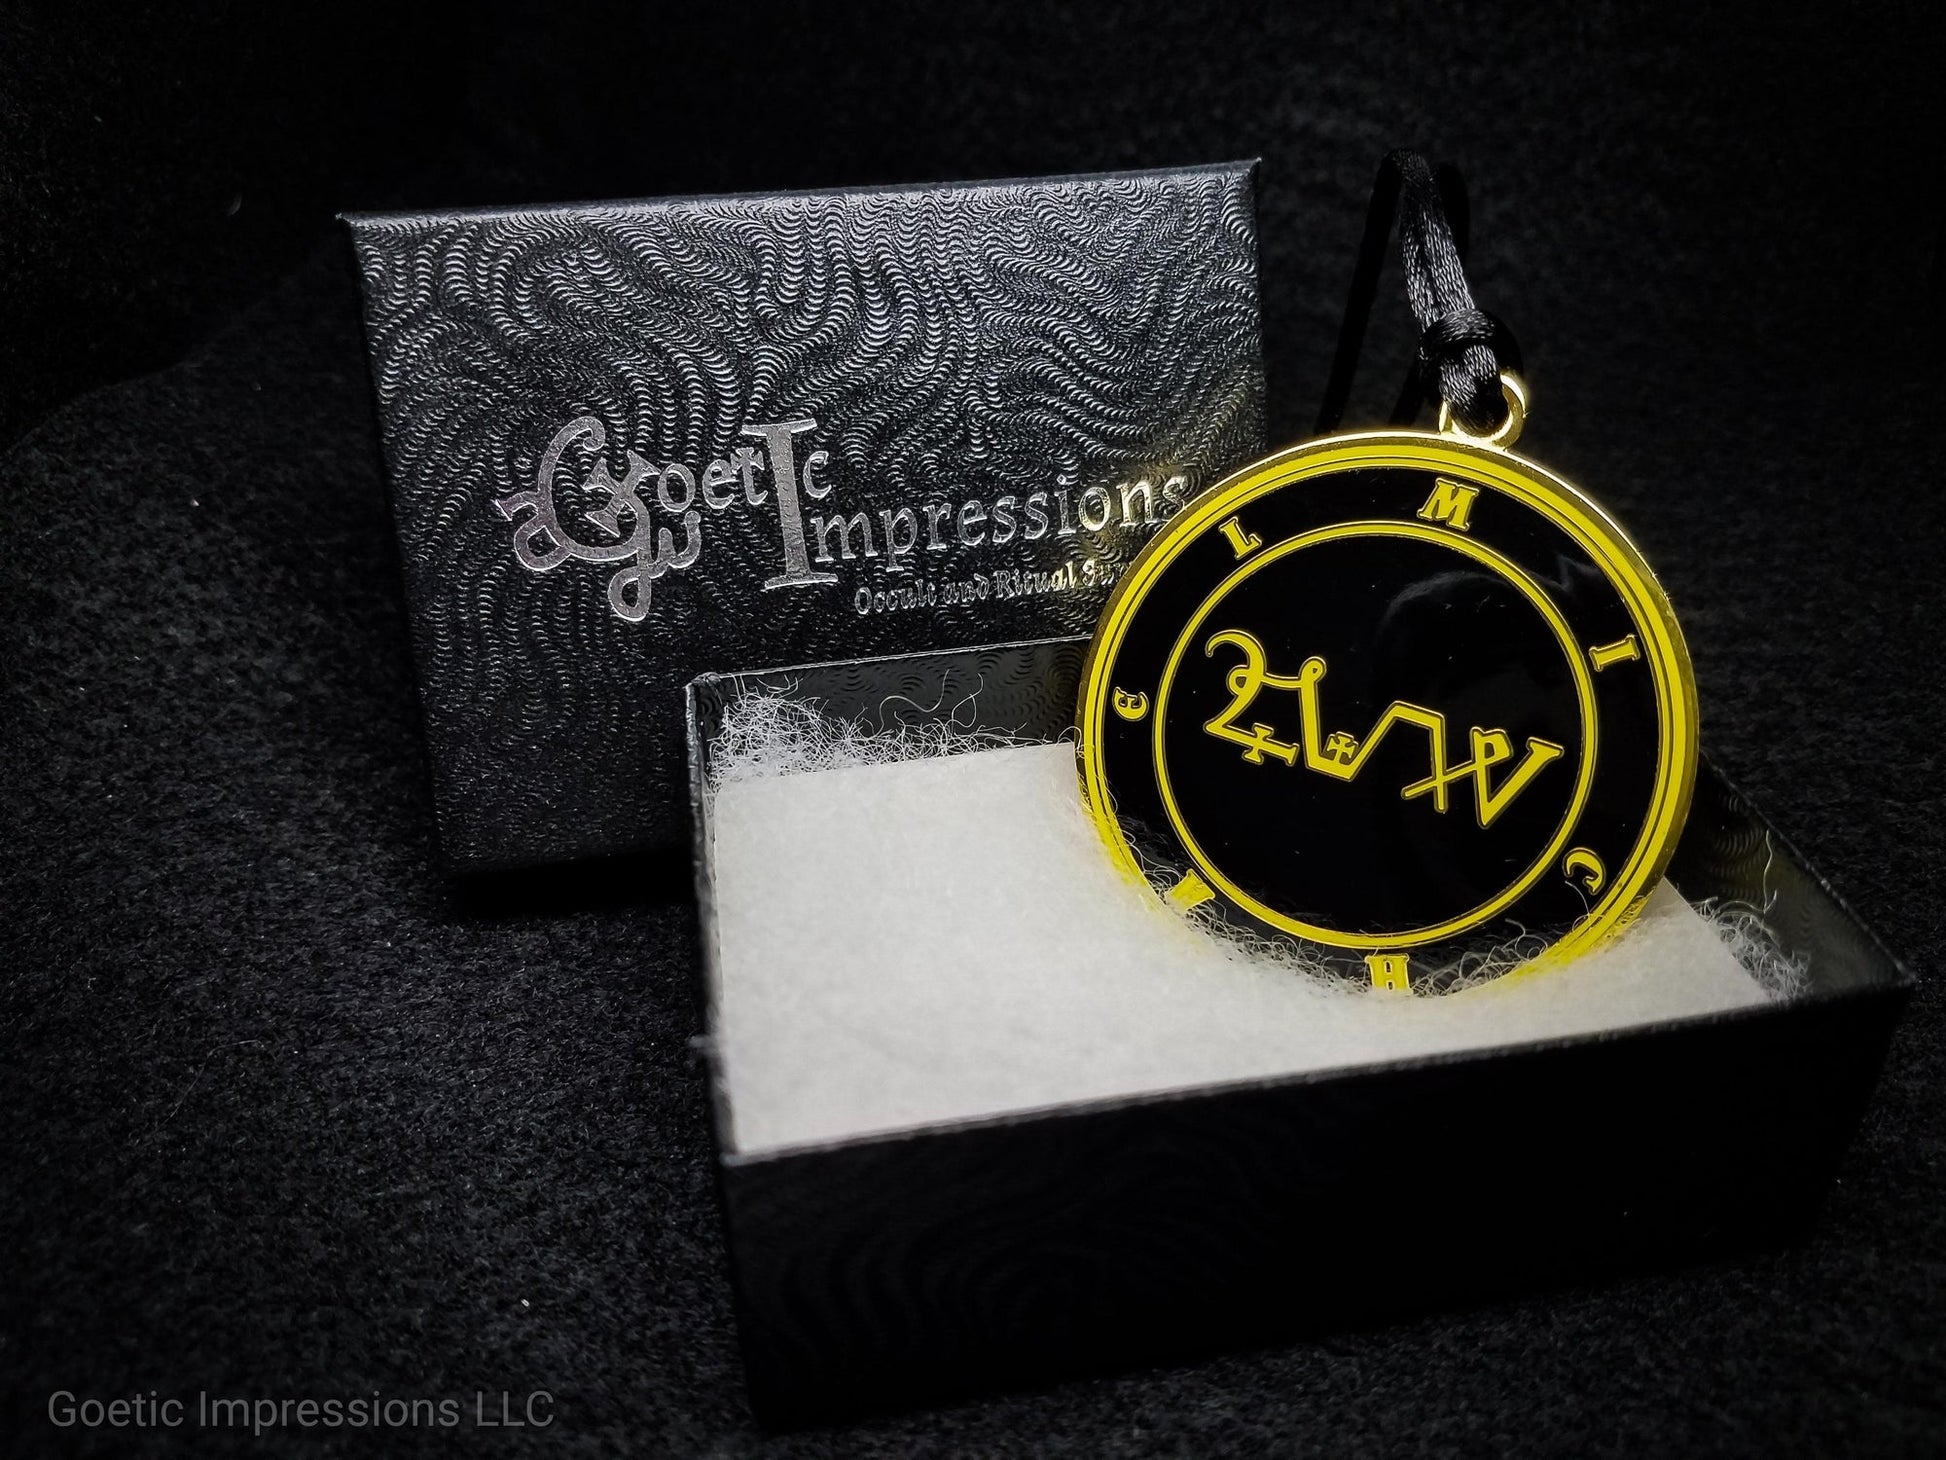 Heptameron Inspired Archangel Pendant featuring the seal and sigils of Archangel Michael - Magus Medallion